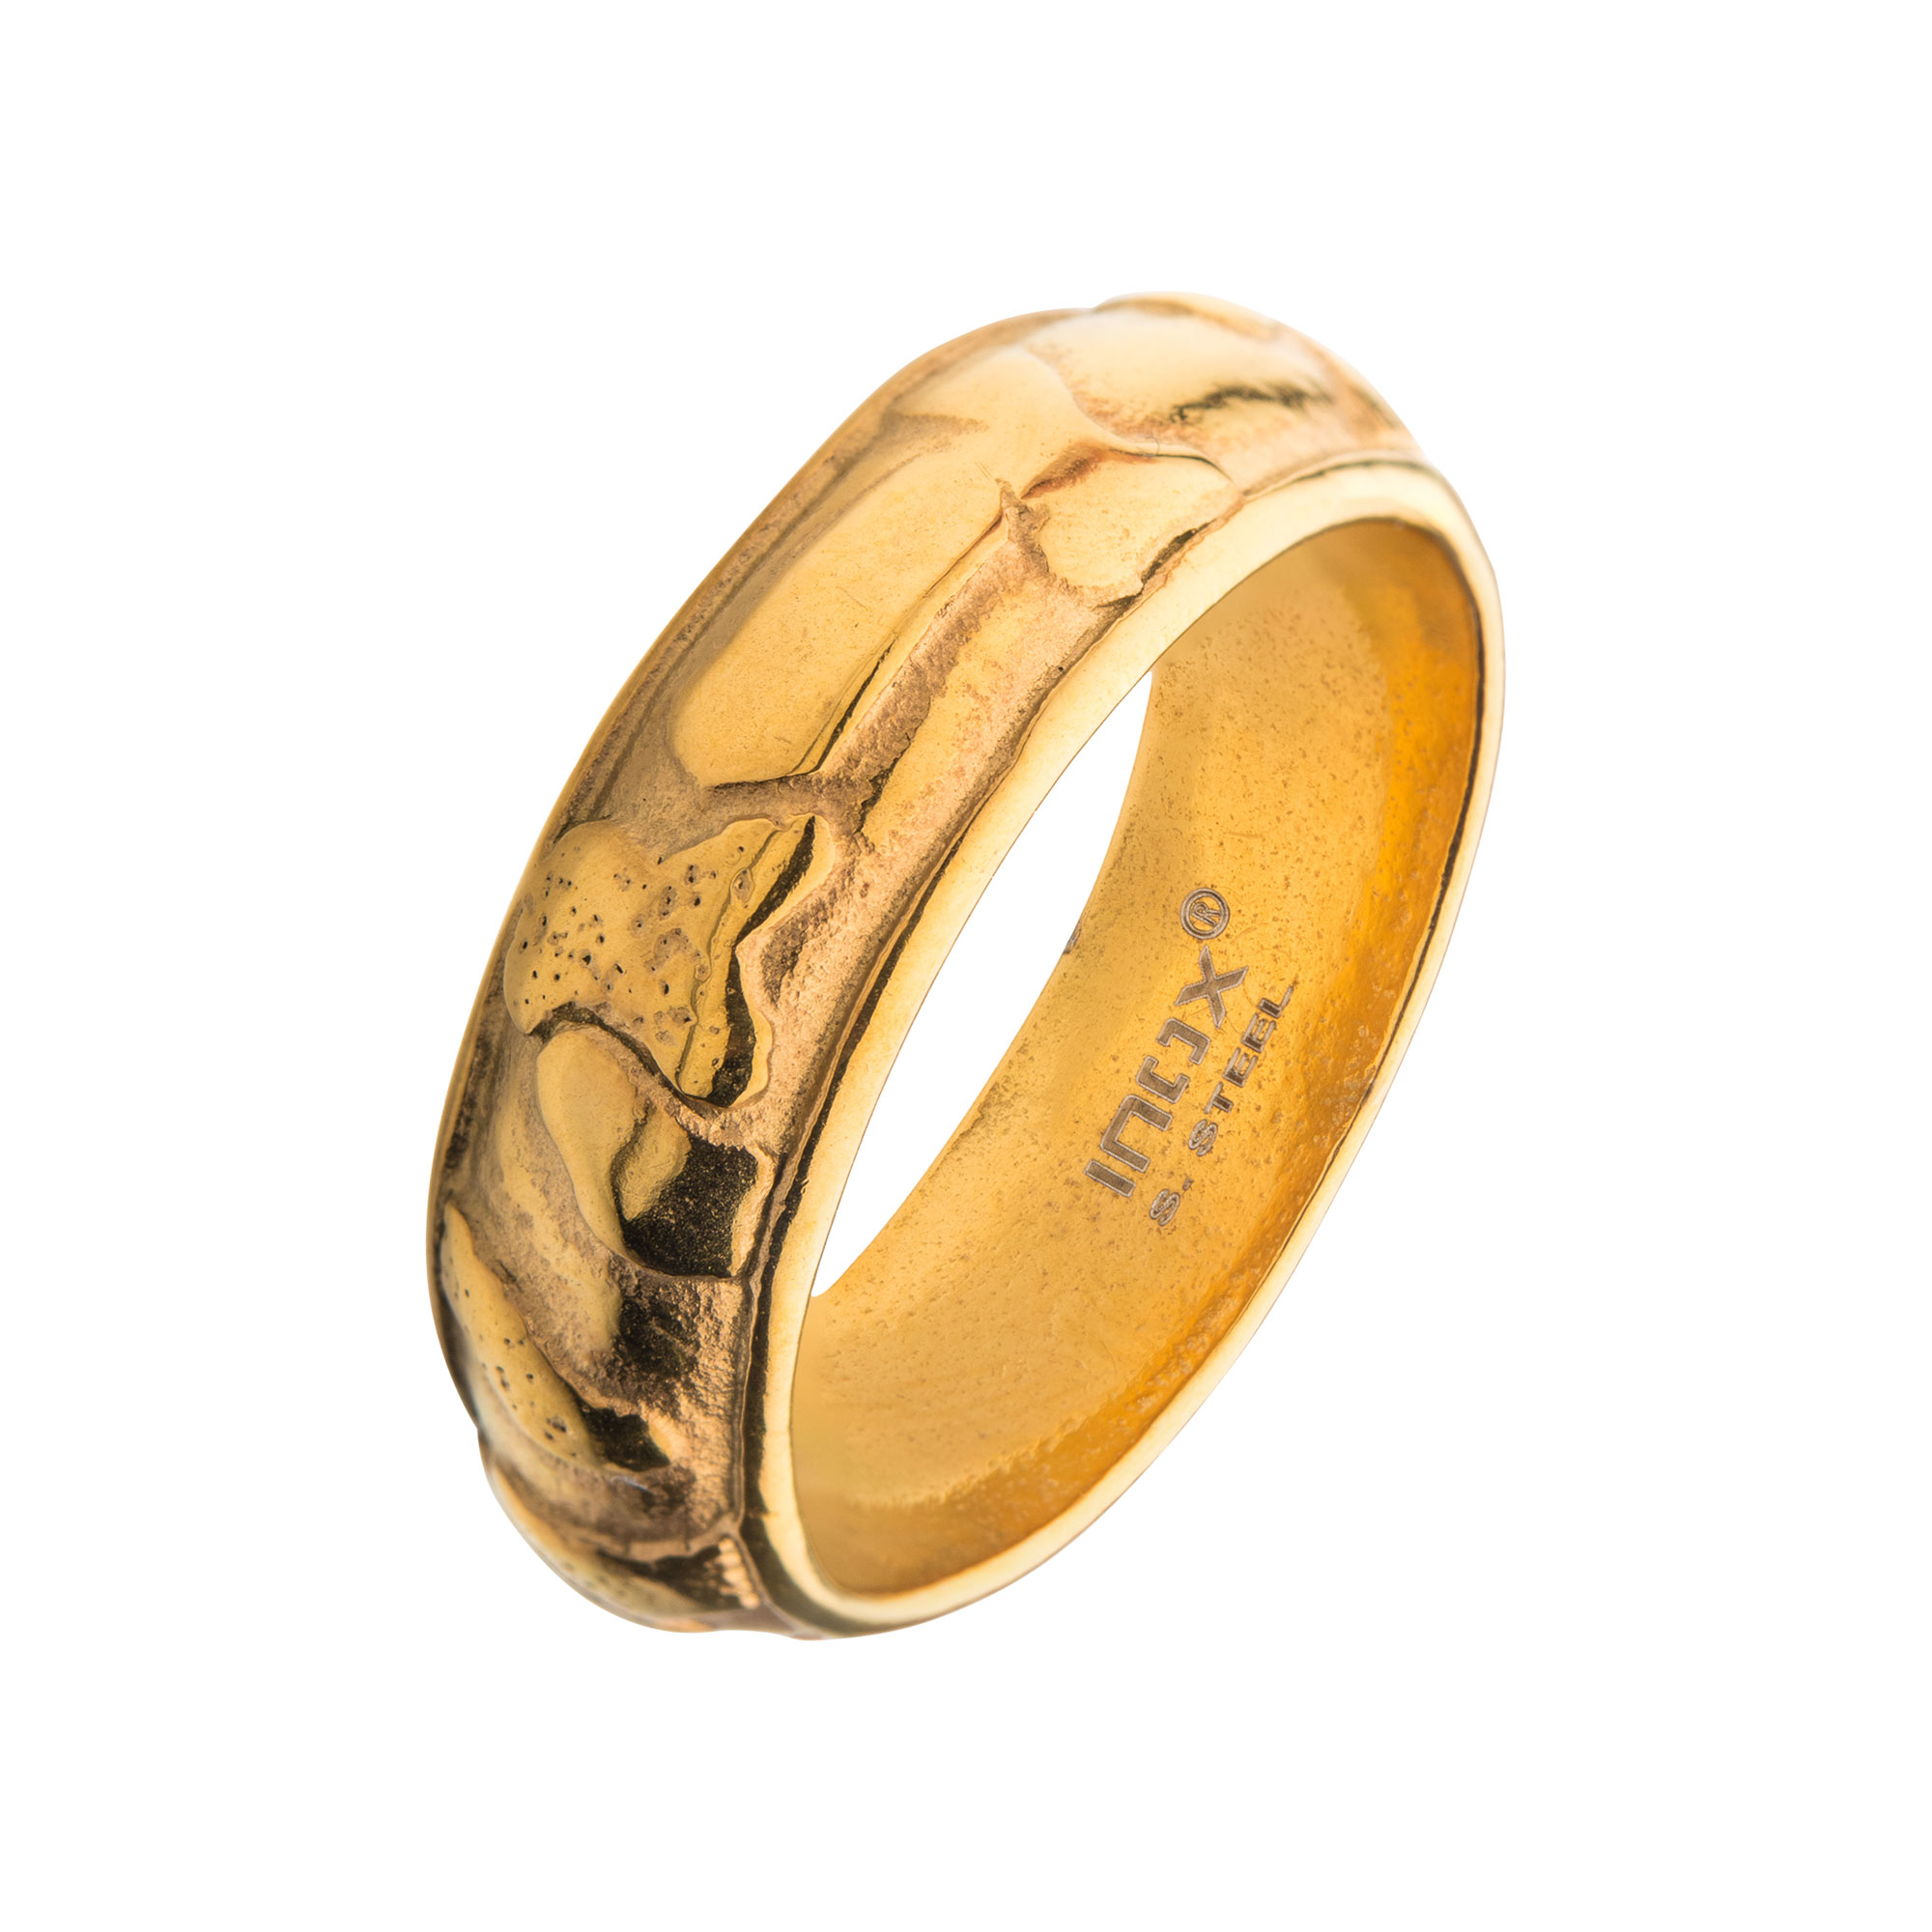 7.5mm Gold Plated 3D Canyon Pattern Ring Morin Jewelers Southbridge, MA